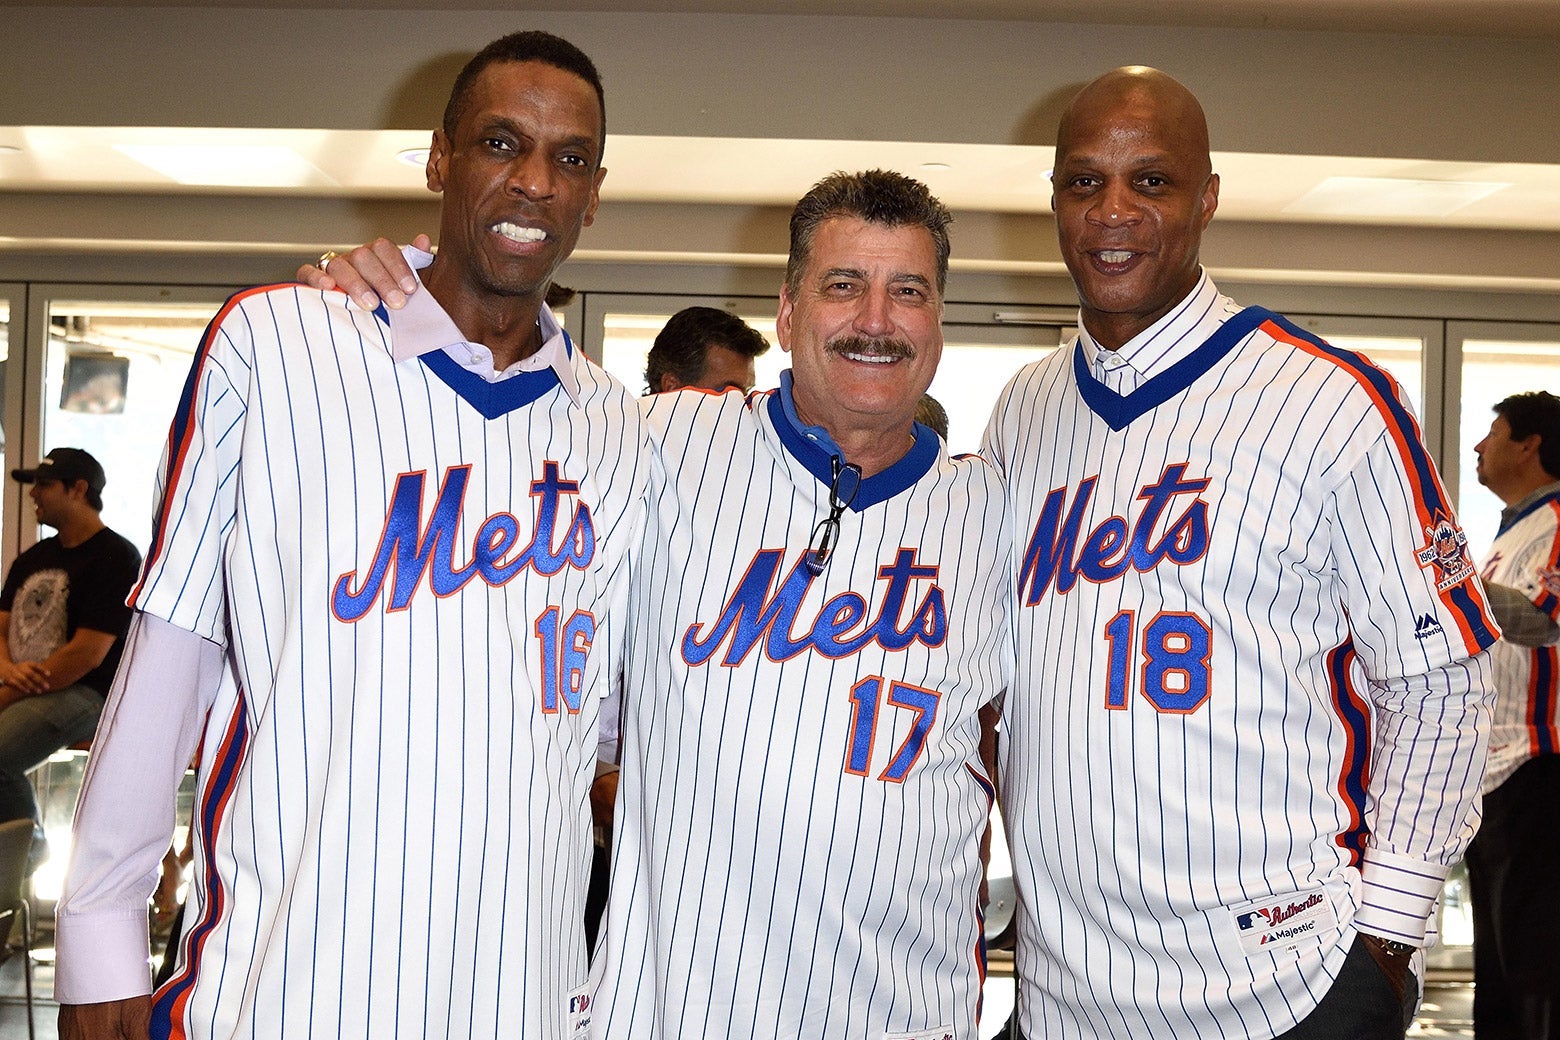 Dwight Gooden, Keith Hernandez, Darryl Strawberry smile while wearing Mets jerseys.